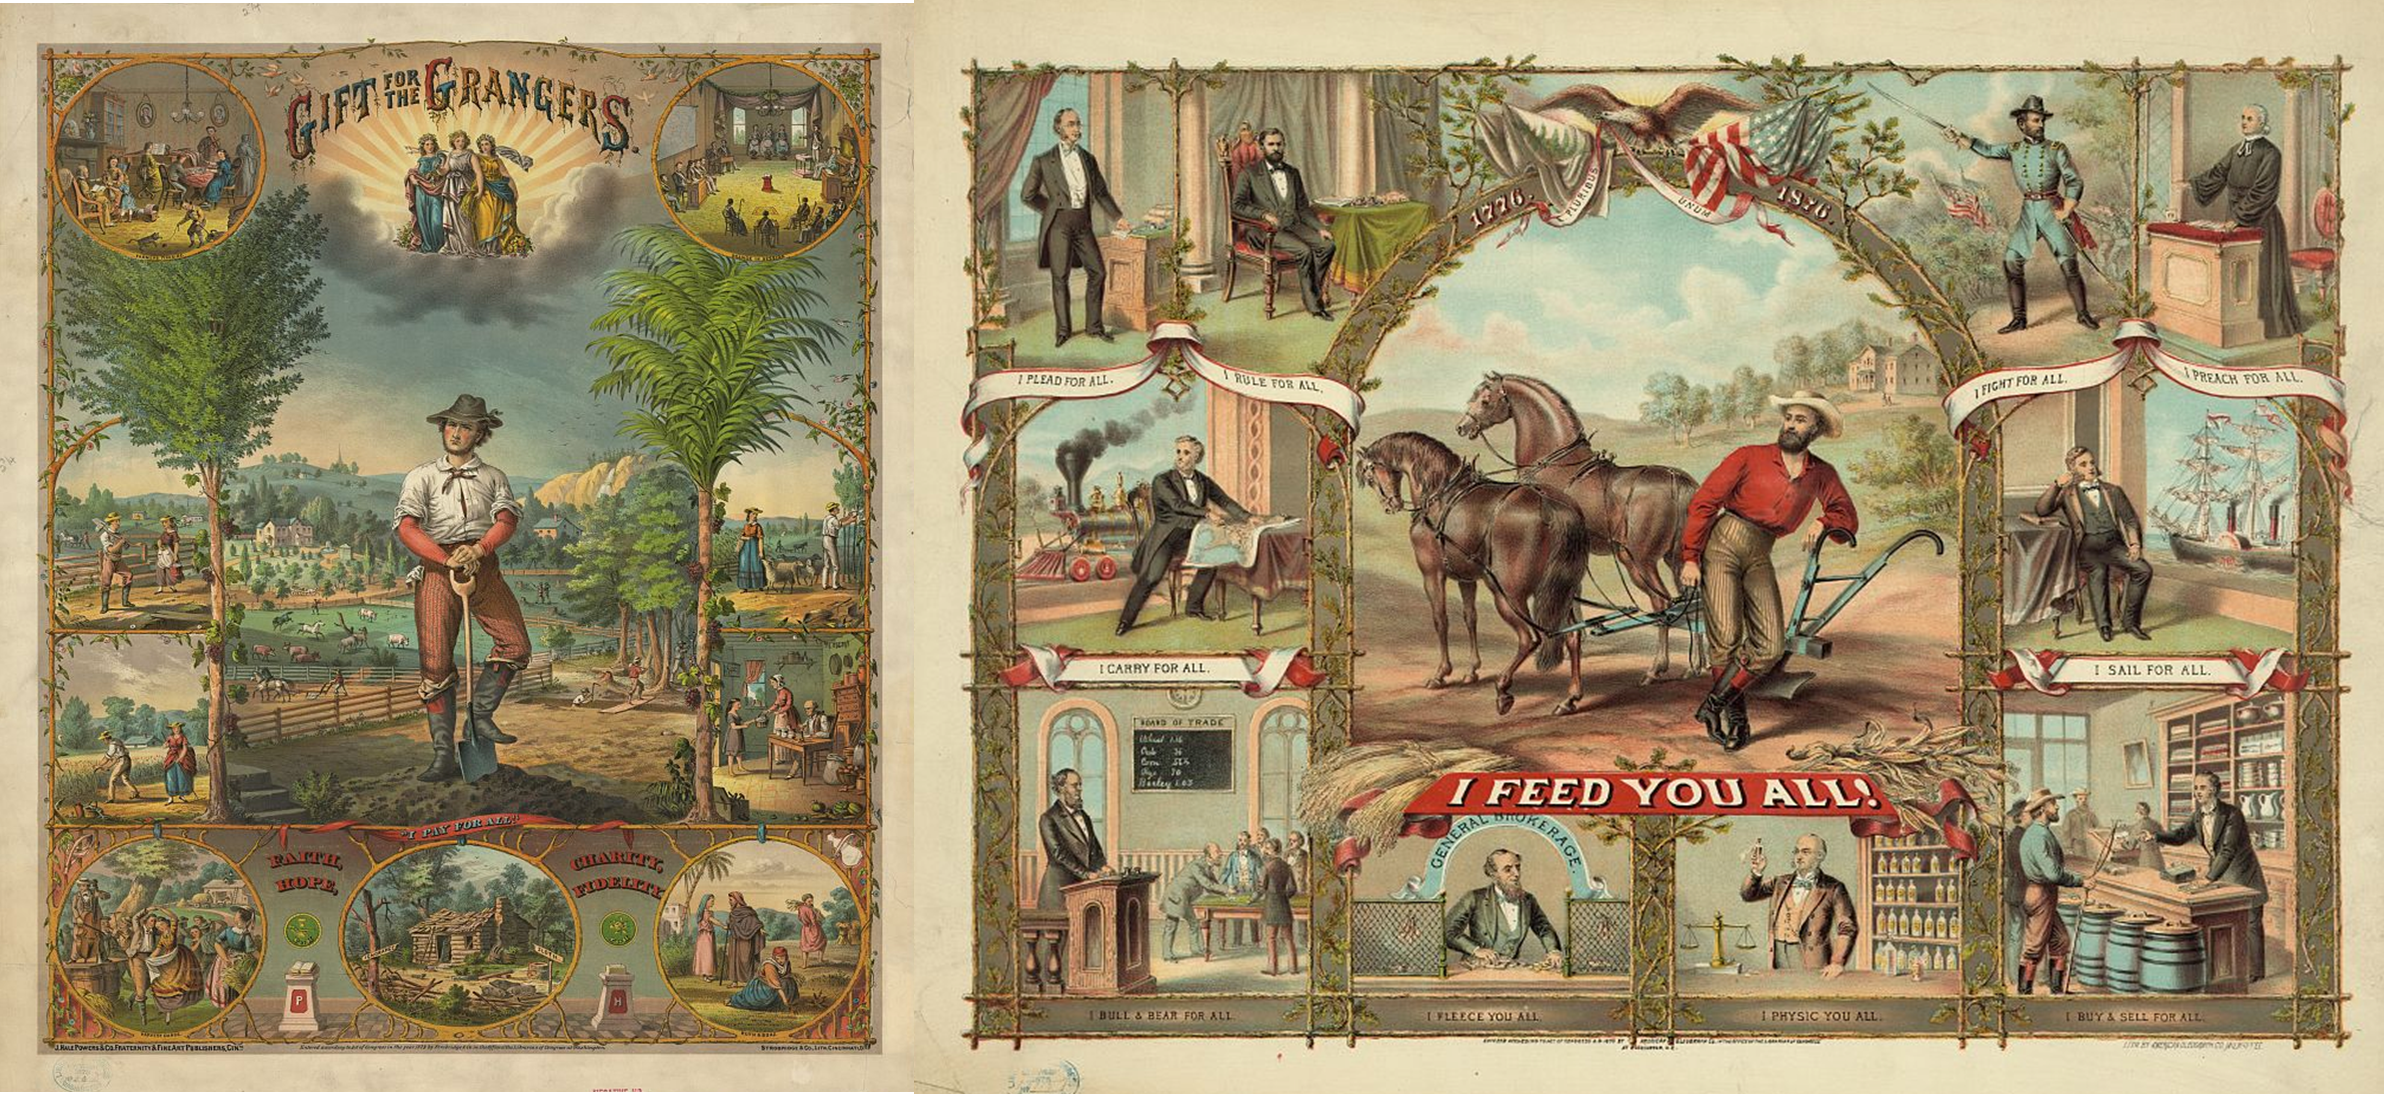  One print is entitled, 'Gift for the Grangers: Faith, Hope, Charity, Fidelity' and shows a variety of scenes of daily life on the outside of a larger image of a farmer in a field. The other print has a large title, ' I feed you all' under a picture of a farmer, plow, and two horses. Along the outside of this larger image is images of different occupations such as a lawyer, sailor, and preacher with captions describing what they do. 